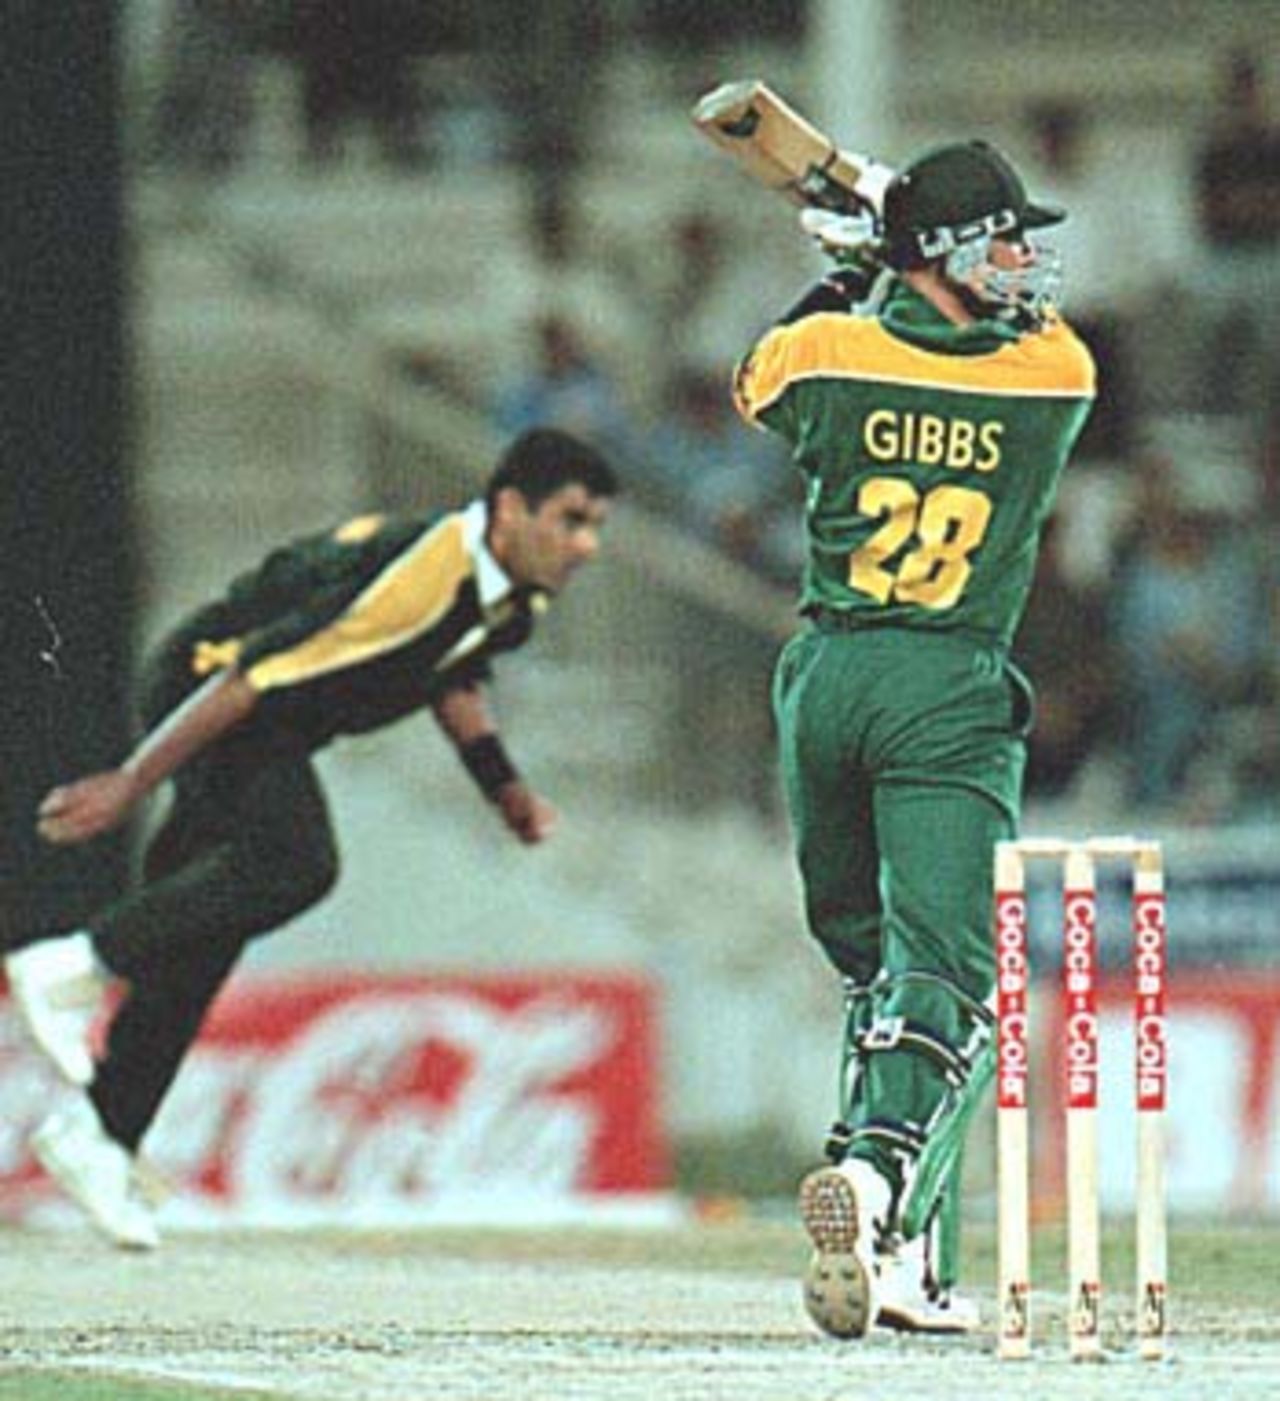 Gibbs smashes Waqar Younis through point, Pakistan v South Africa, Coca-Cola Cup 1999/00, Sharjah C.A. Stadium, 28 March 2000.